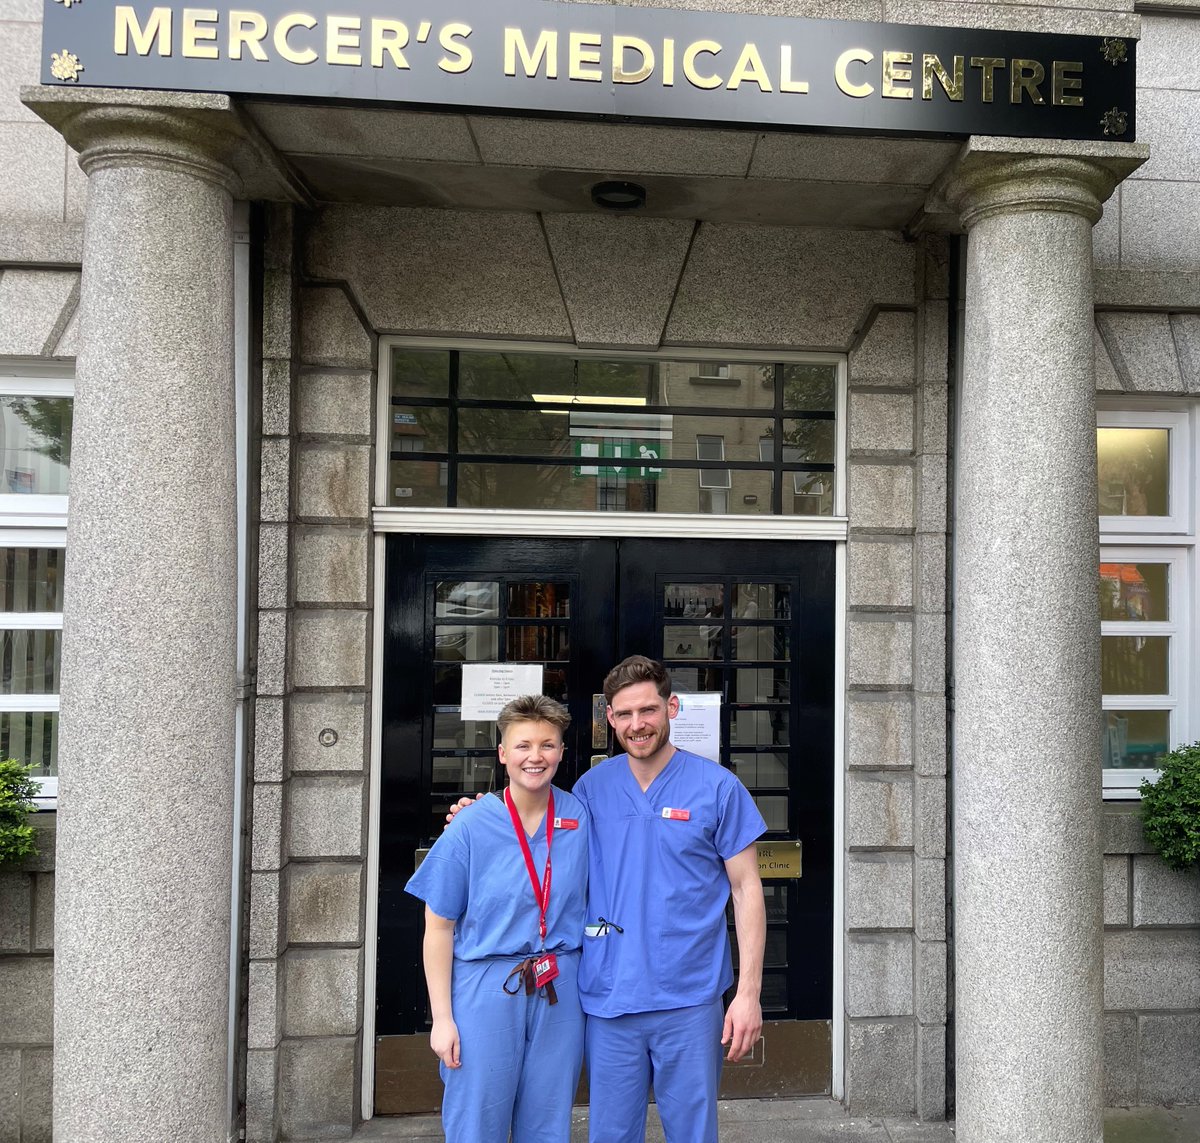 Our year 2 PA students have kicked off their General Practice rotations this week! 👩‍⚕️🧑‍⚕️
@sbrannigan98 and @I_Footlong outside their placement at @MercersMedical this afternoon. 

GP rotations allow #PAstudents to learn and interact with a diverse range of patients day-to-day.